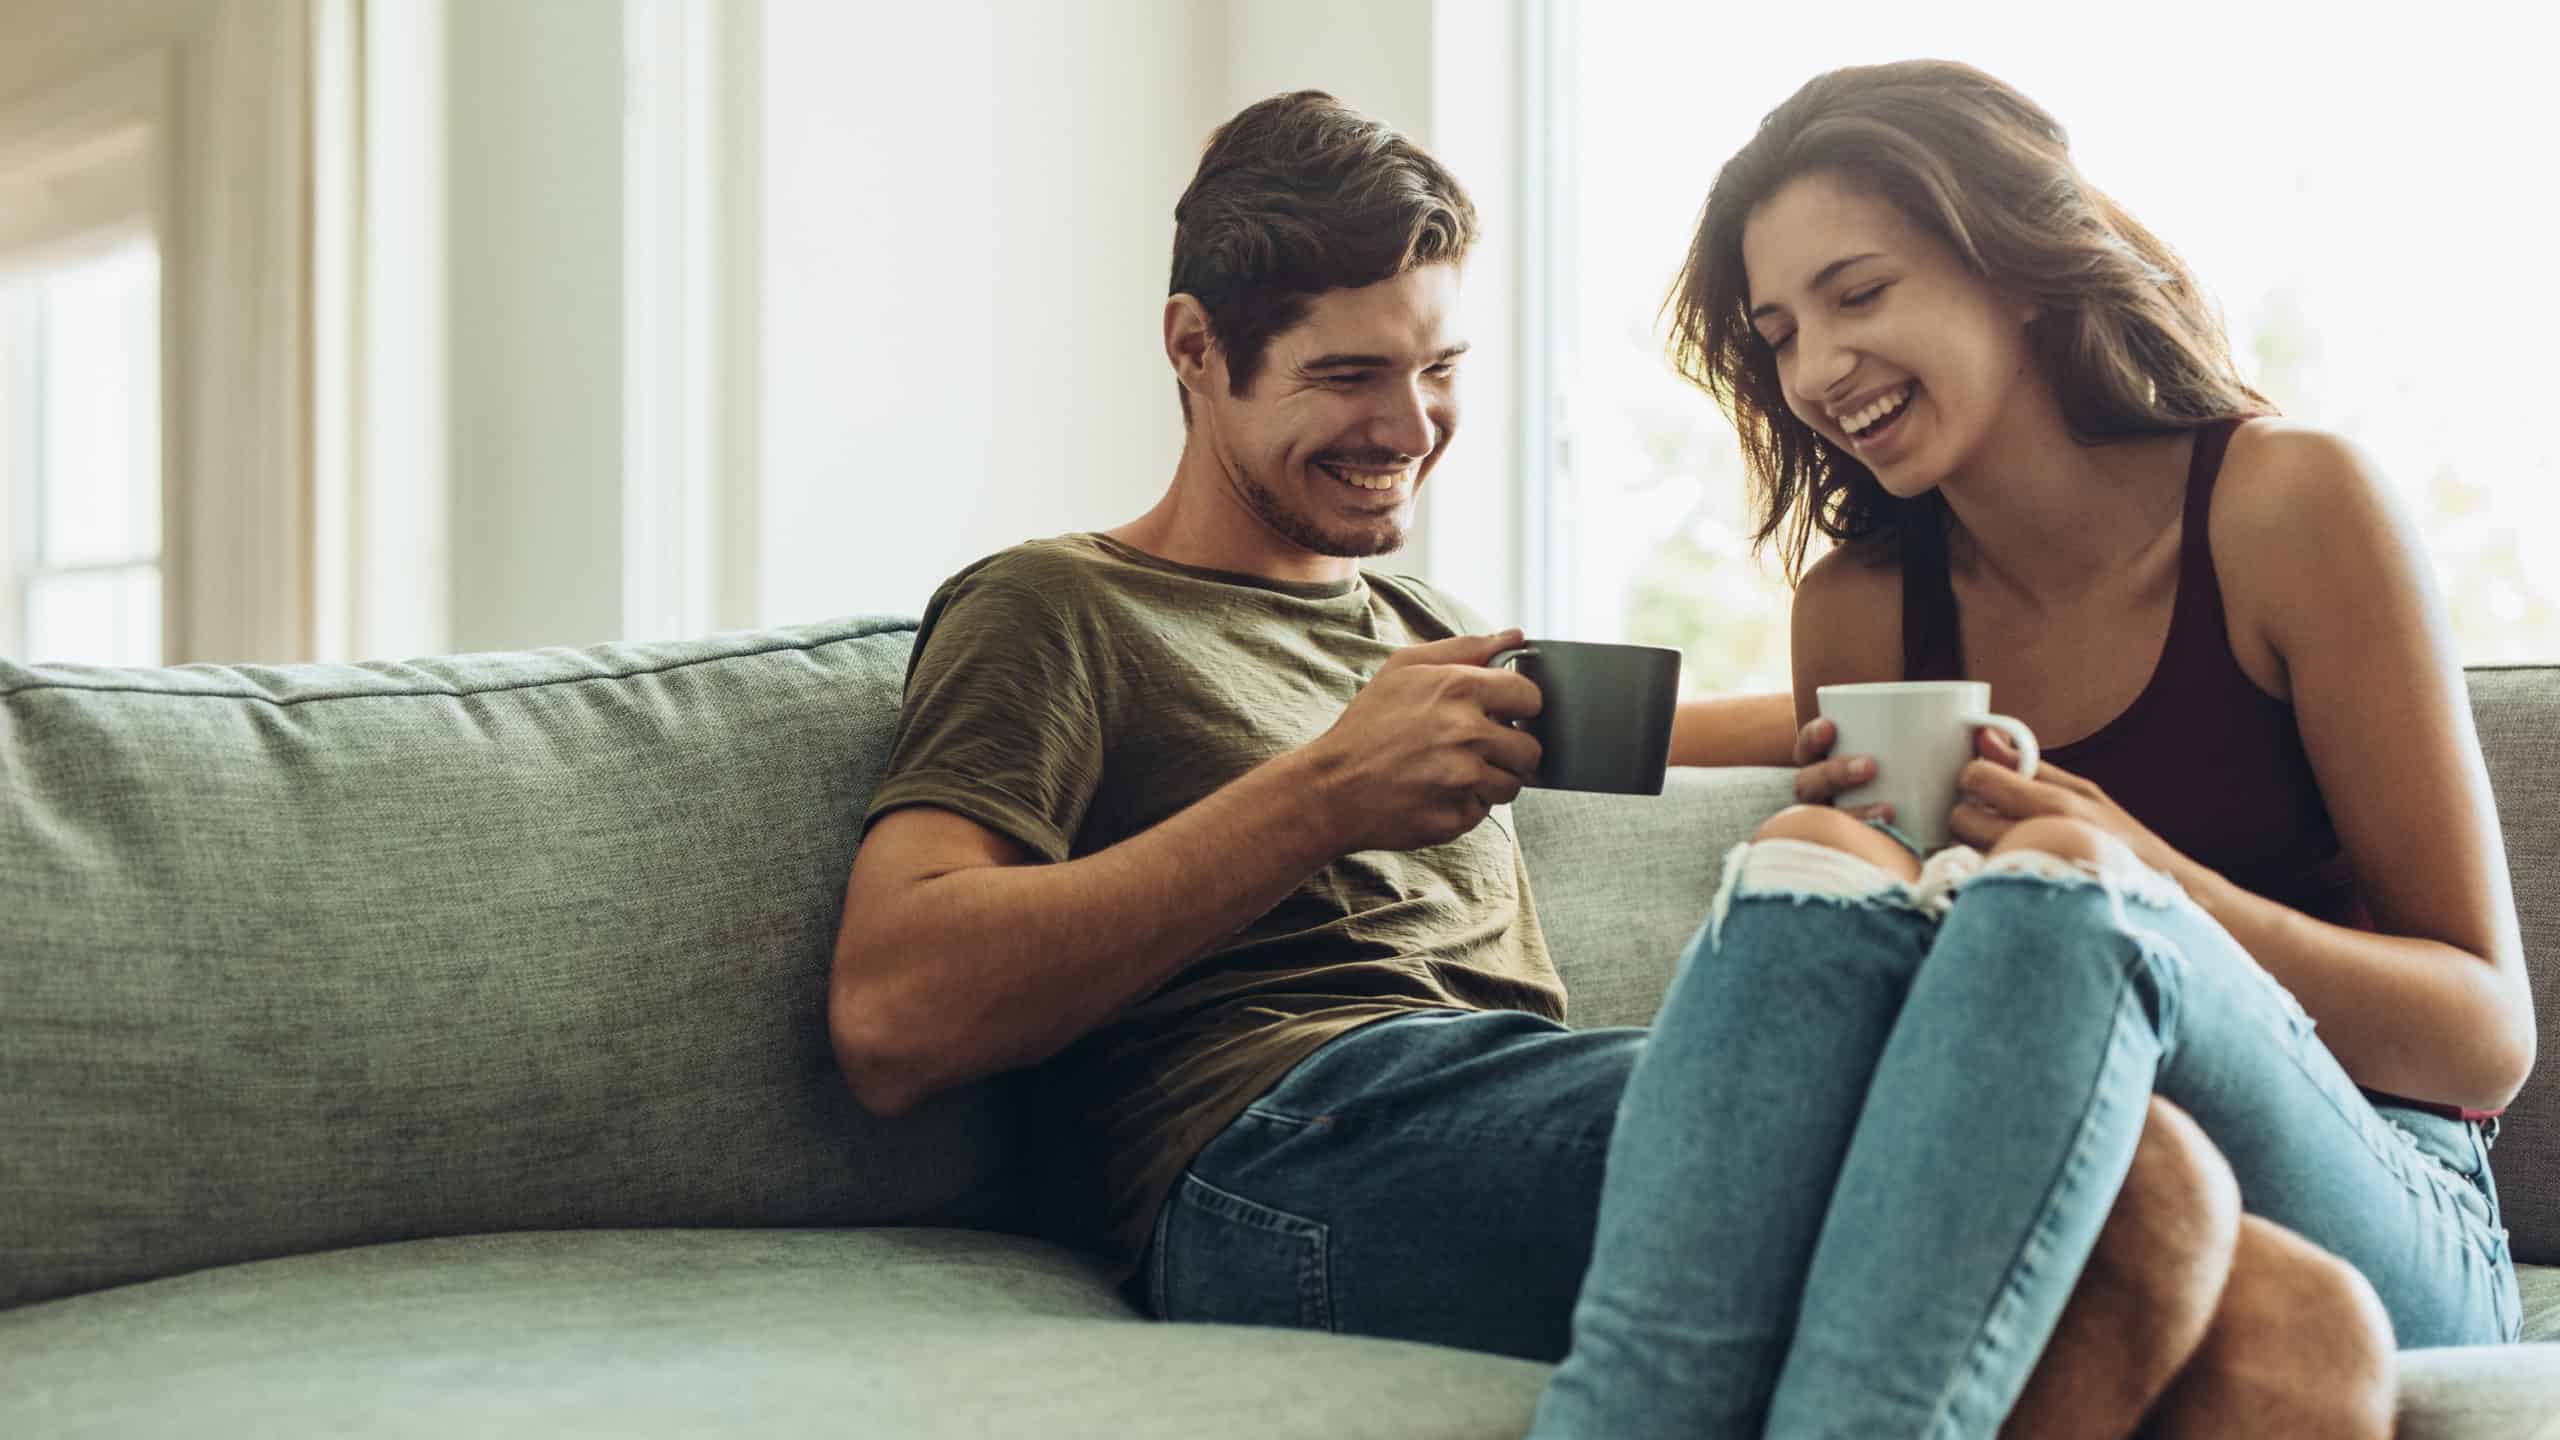 Couple sitting together on couch, laughing and enjoying cups of coffee